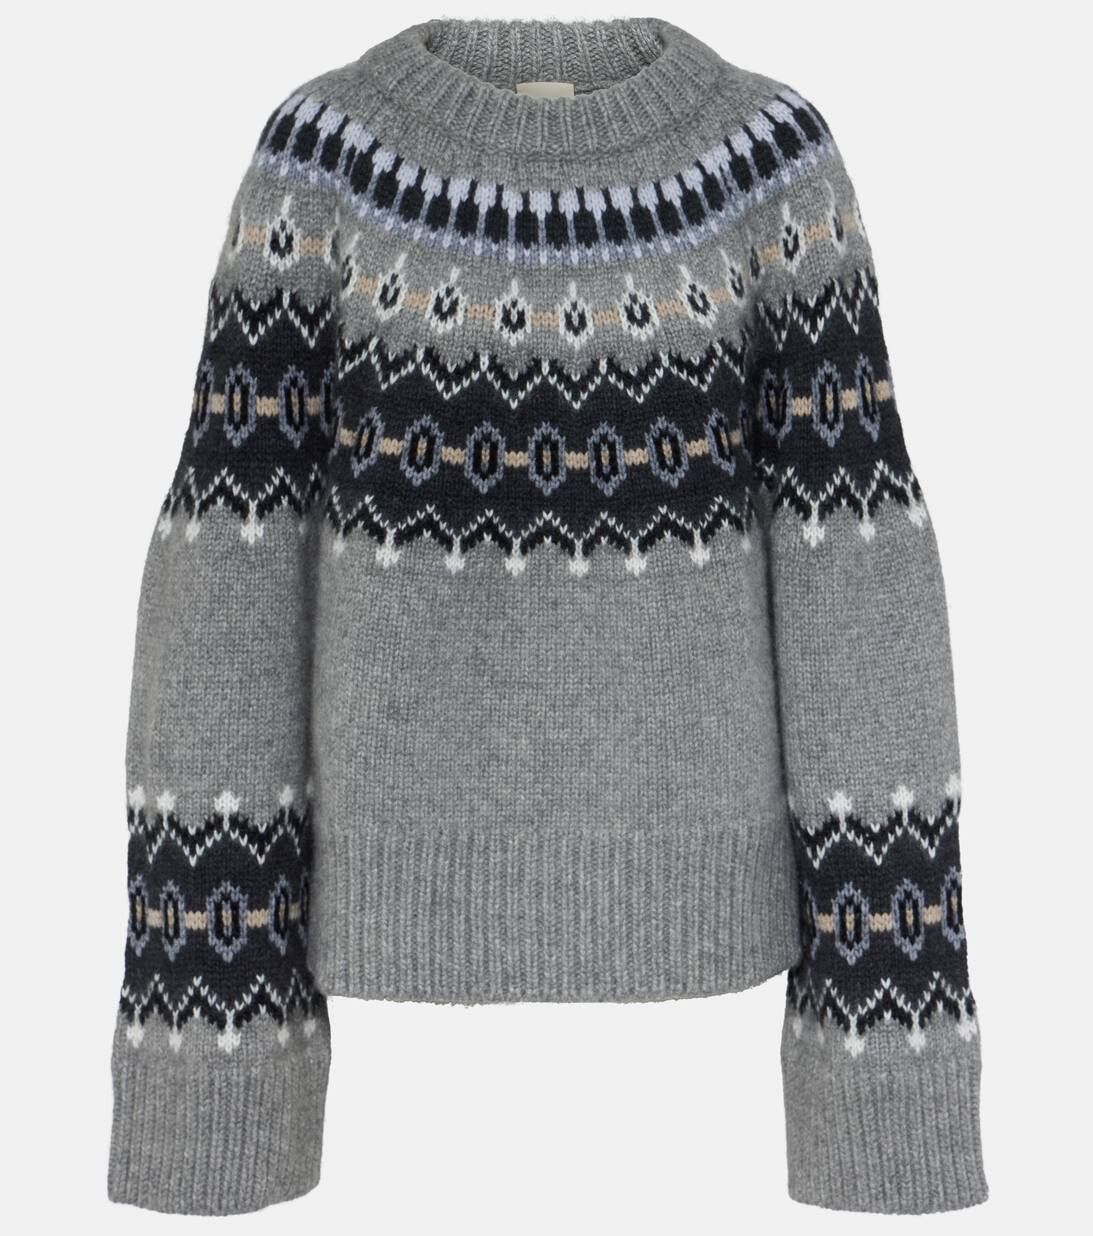 Halo intarsia cashmere and mohair sweater | Mytheresa (INTL)